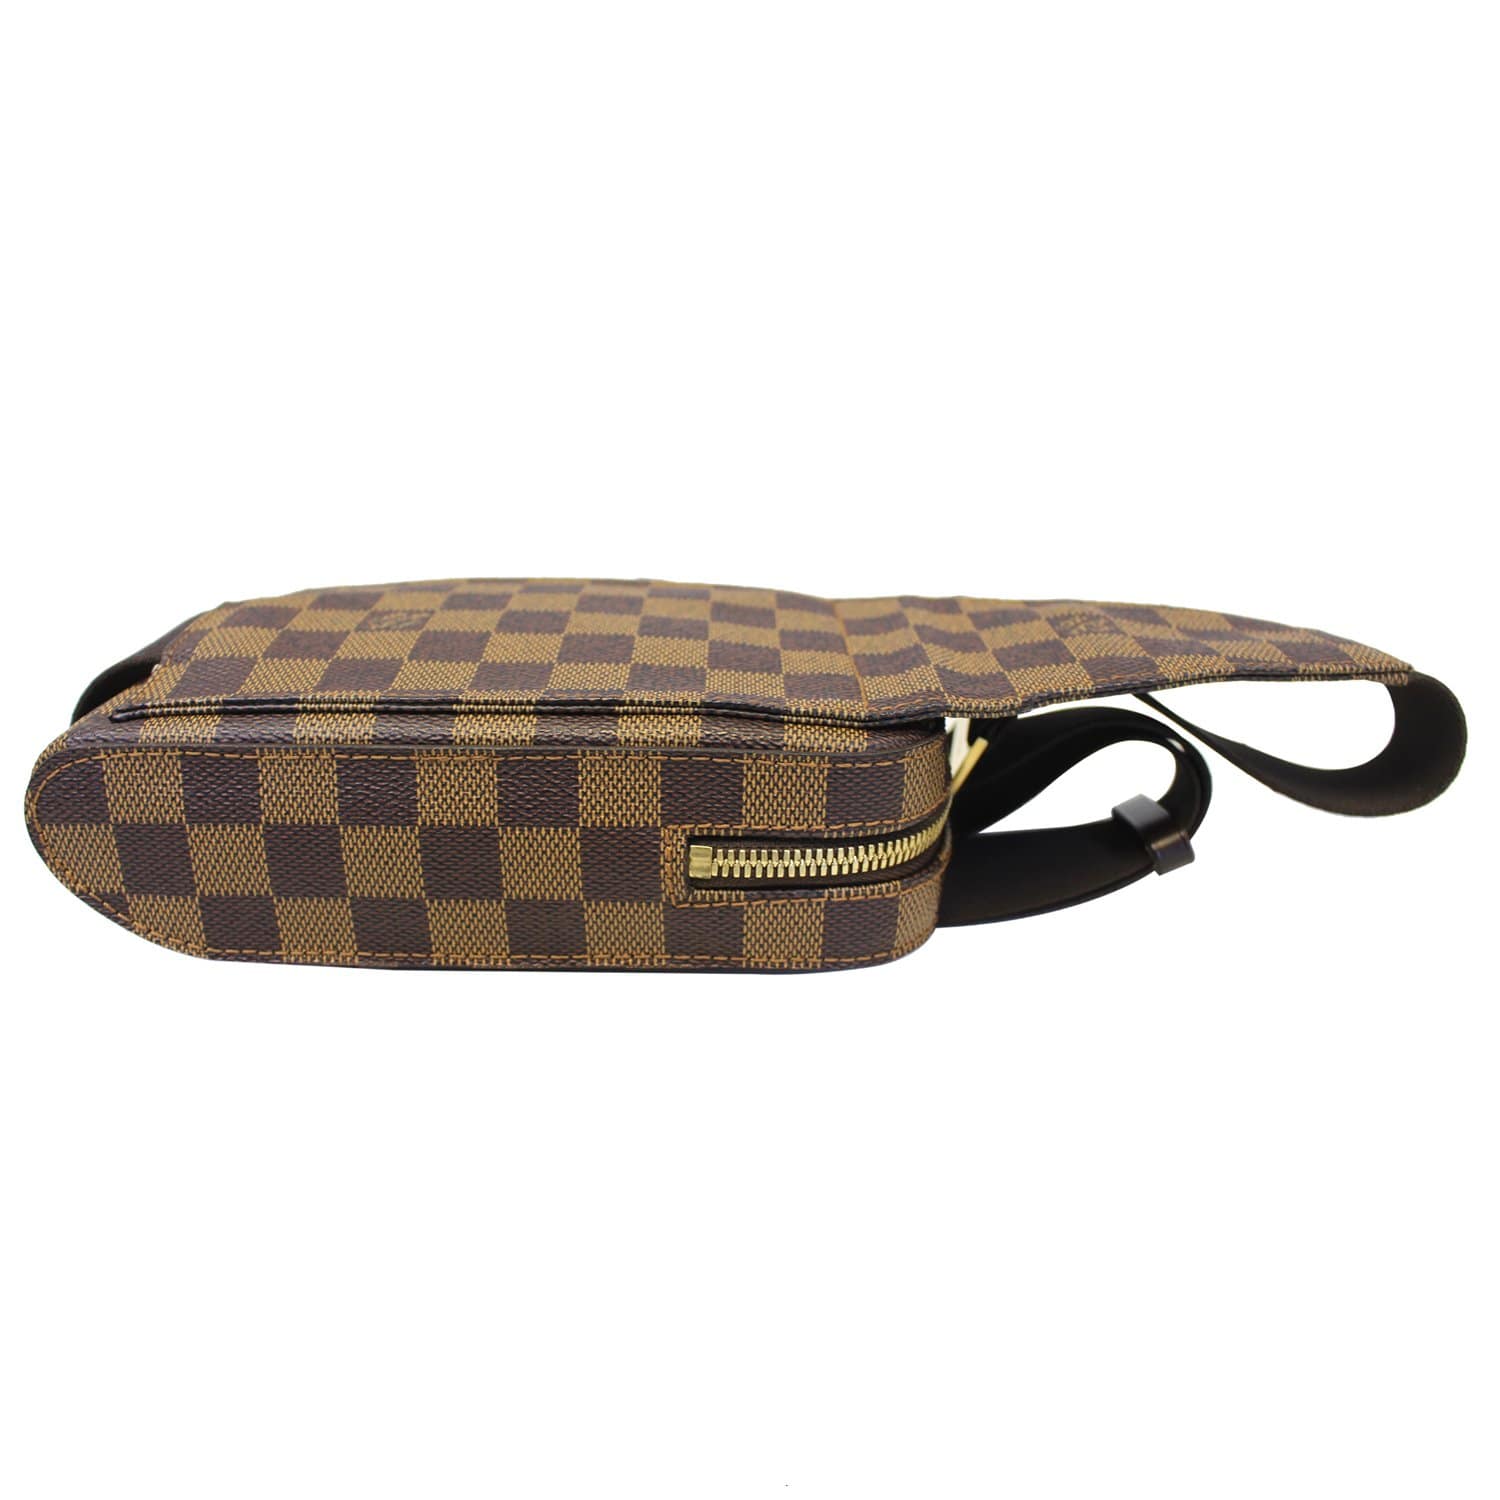 louis vuitton checkered fanny pack